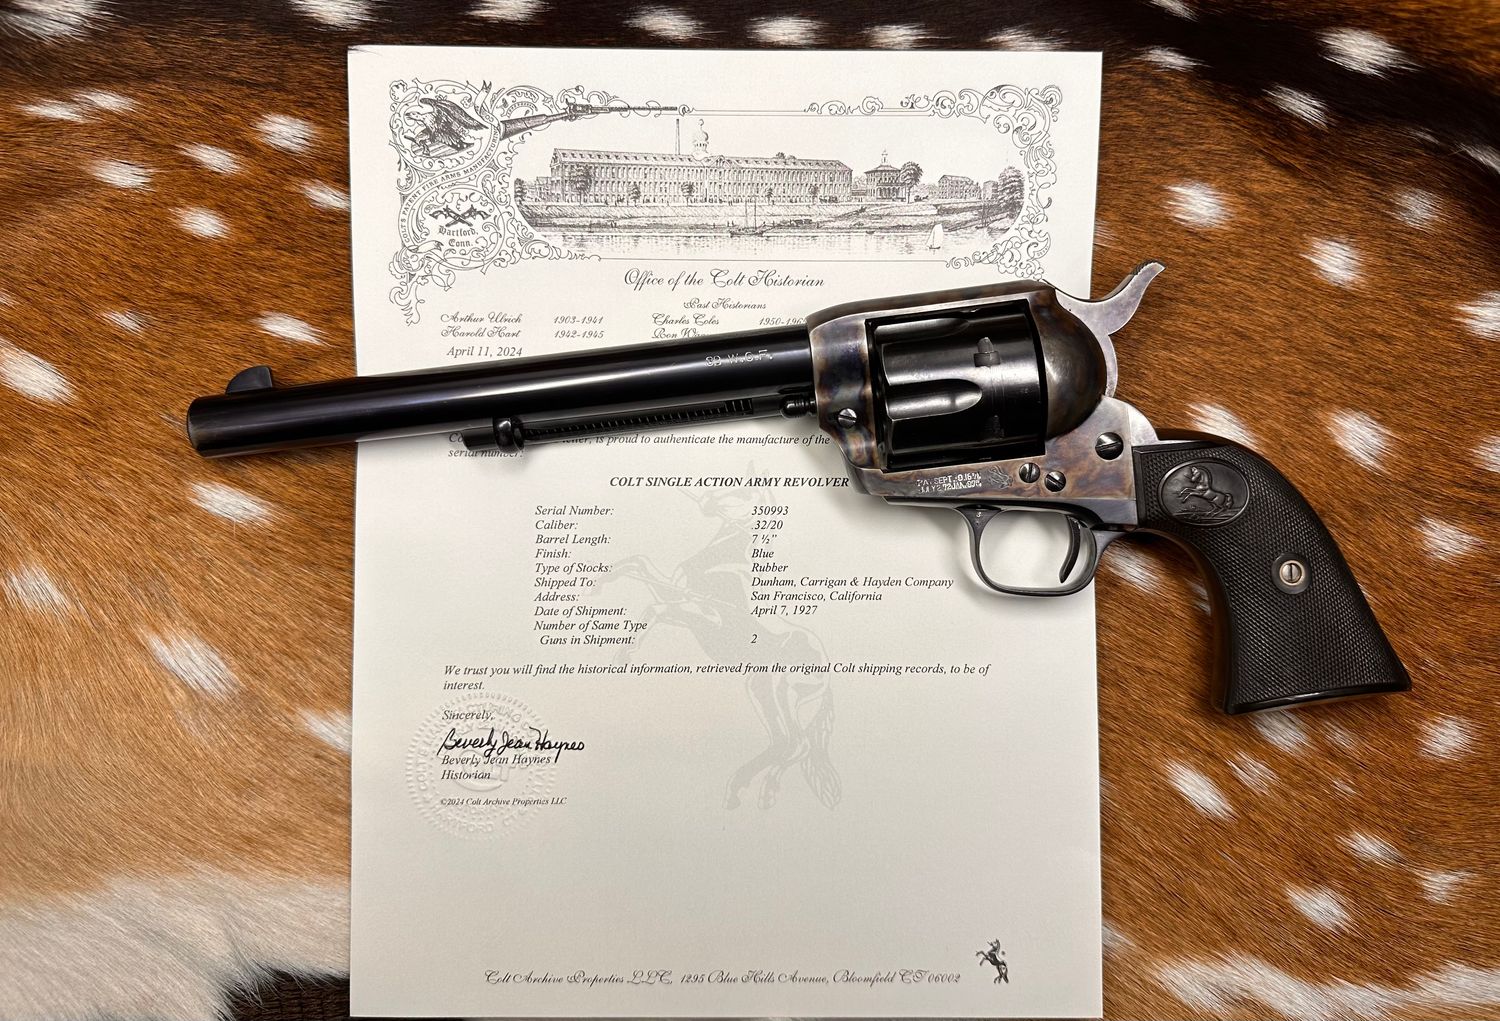 Lettered Pre-World War II Colt Single Action Army Revolver